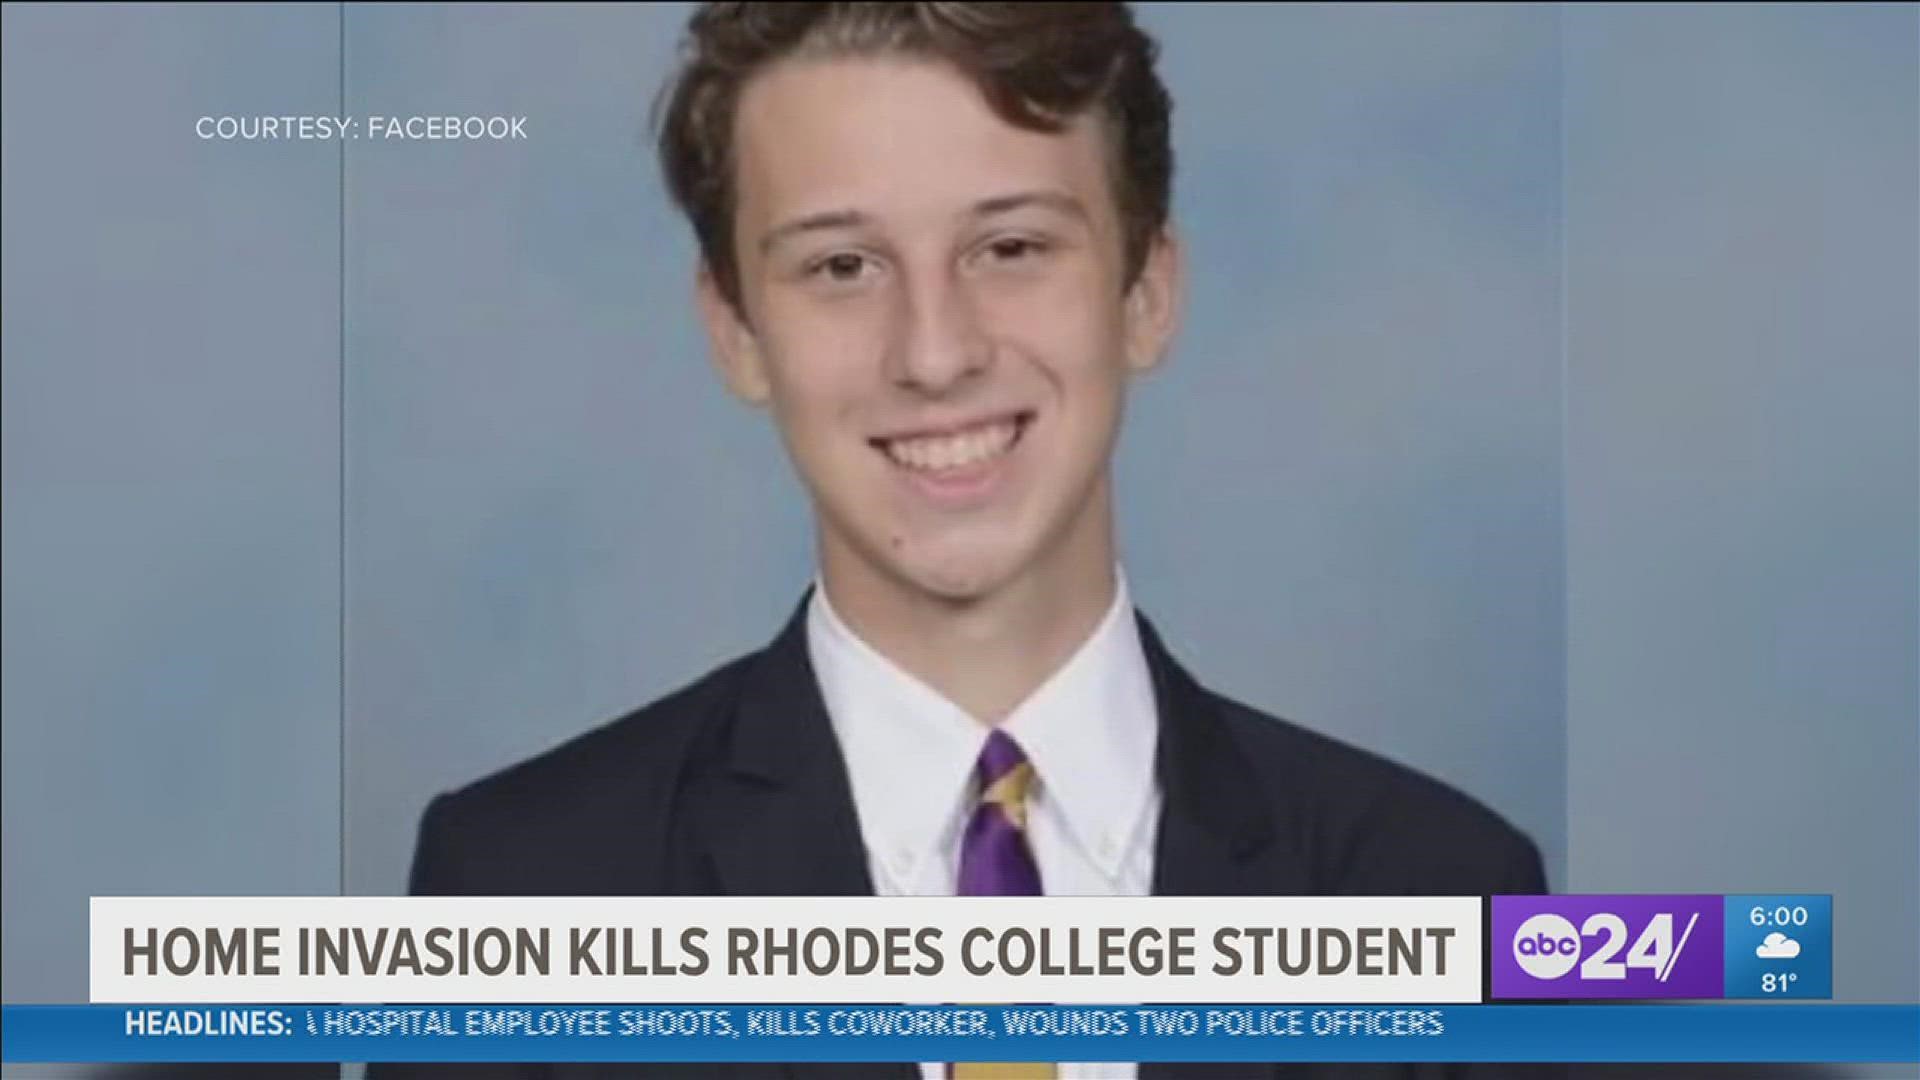 The senior was shot & killed, another student injured Sunday morning in what authorities described as home invasion near Rhodes College campus.